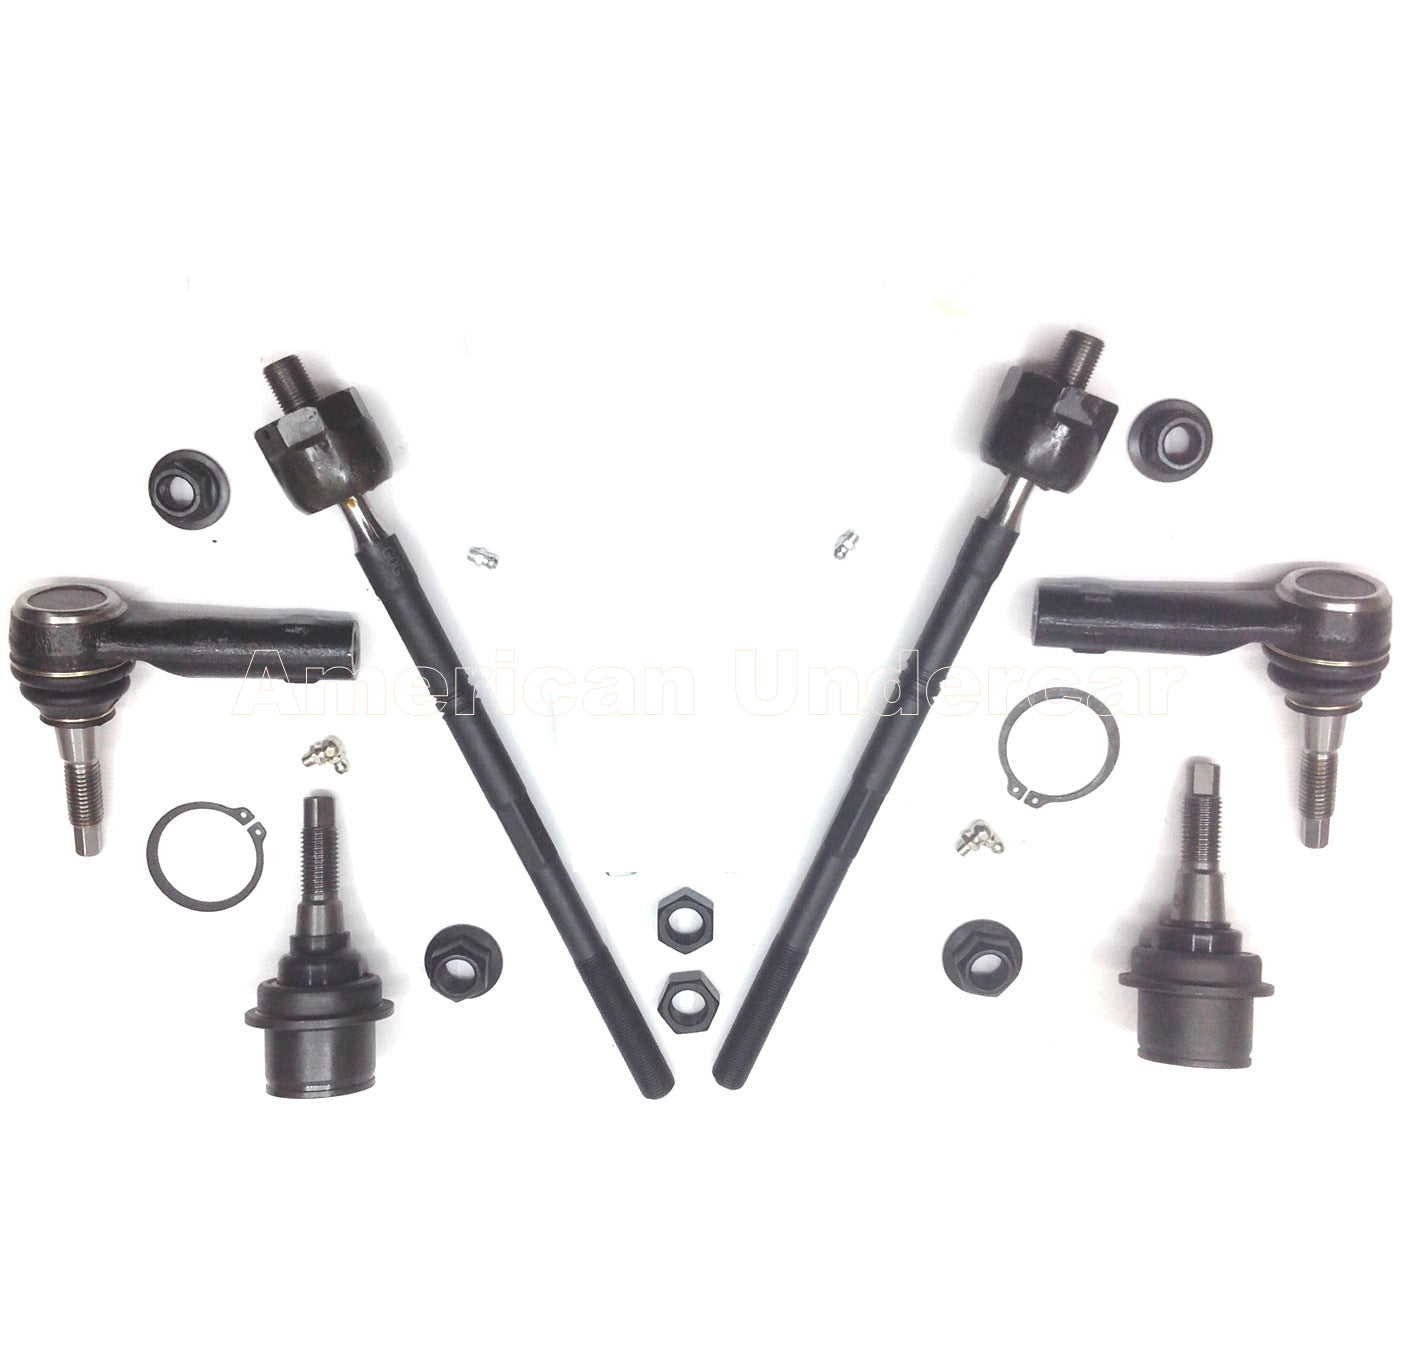 HD Lower Ball Joints Tie Rod Steering Kit for 2003-2006 Ford Expedition 4x4